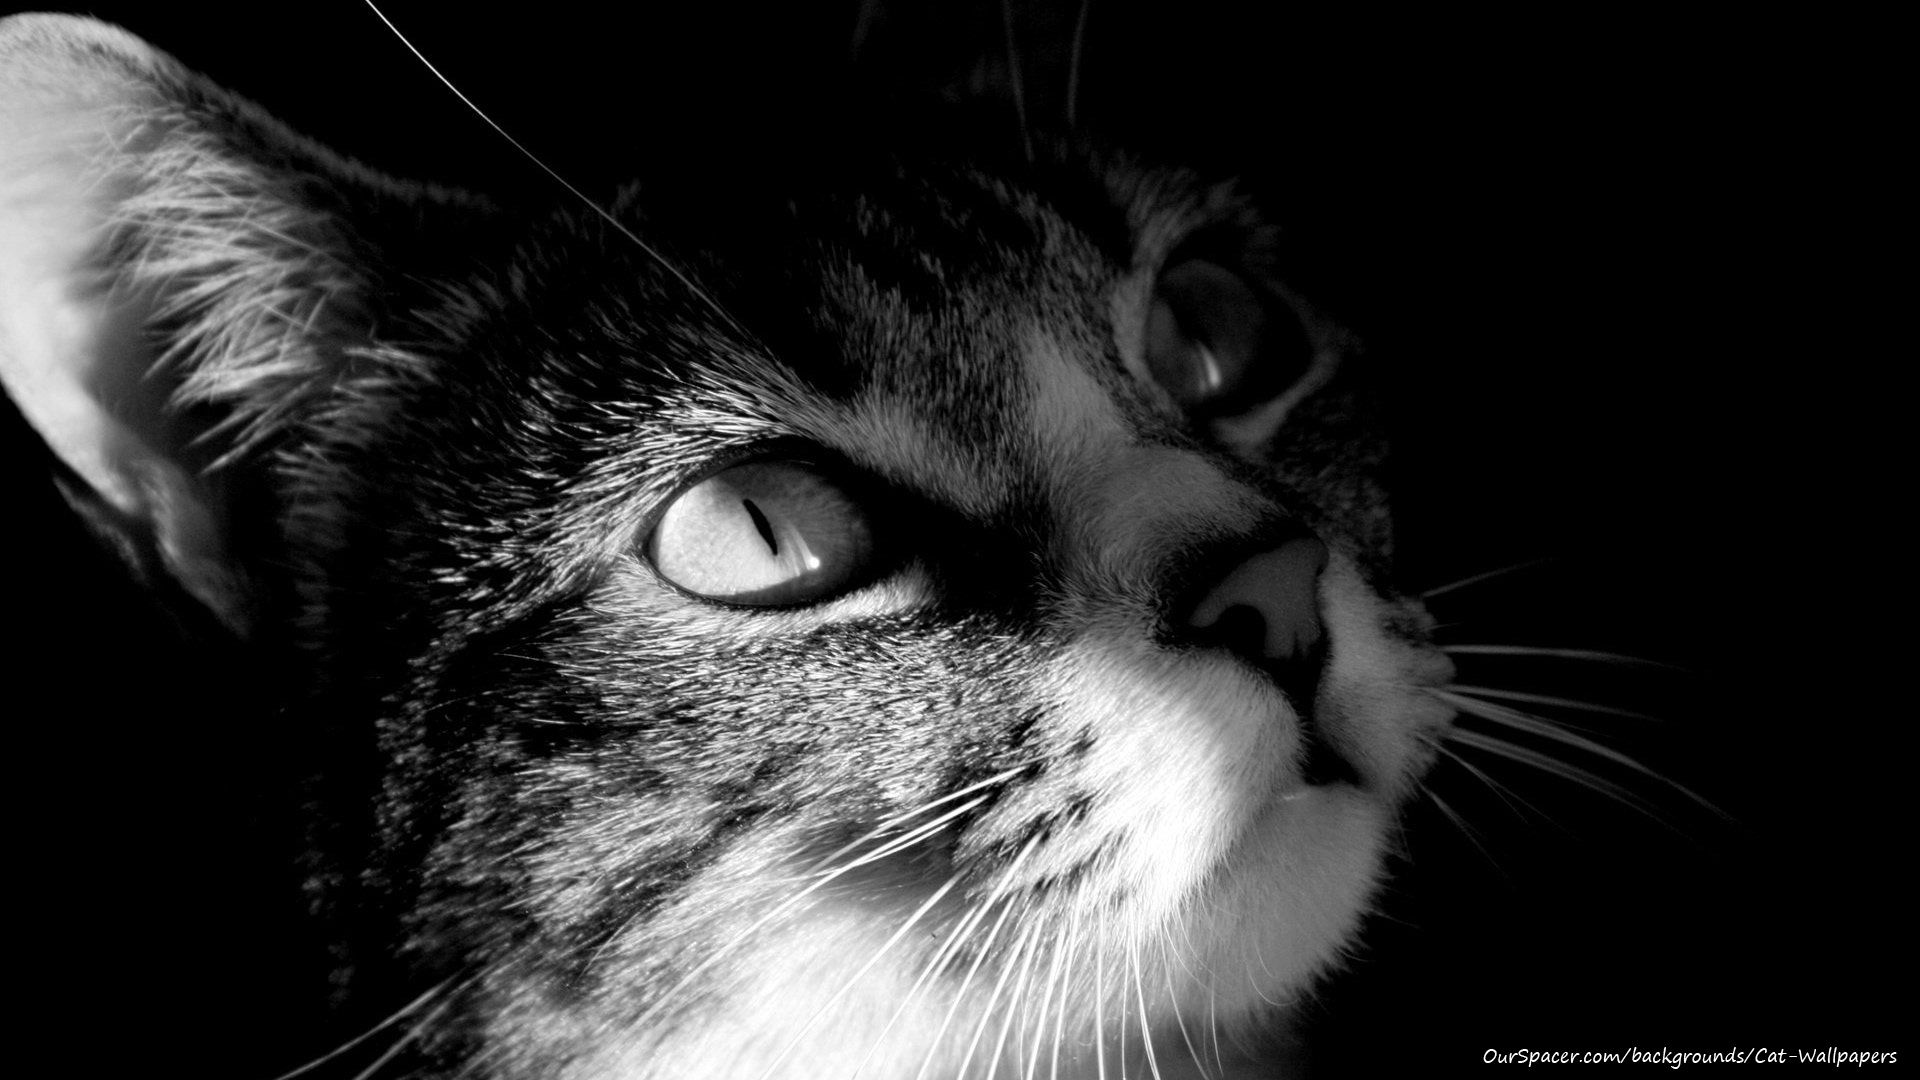 Black and white striped cat 1920x1080 wallpaper and background